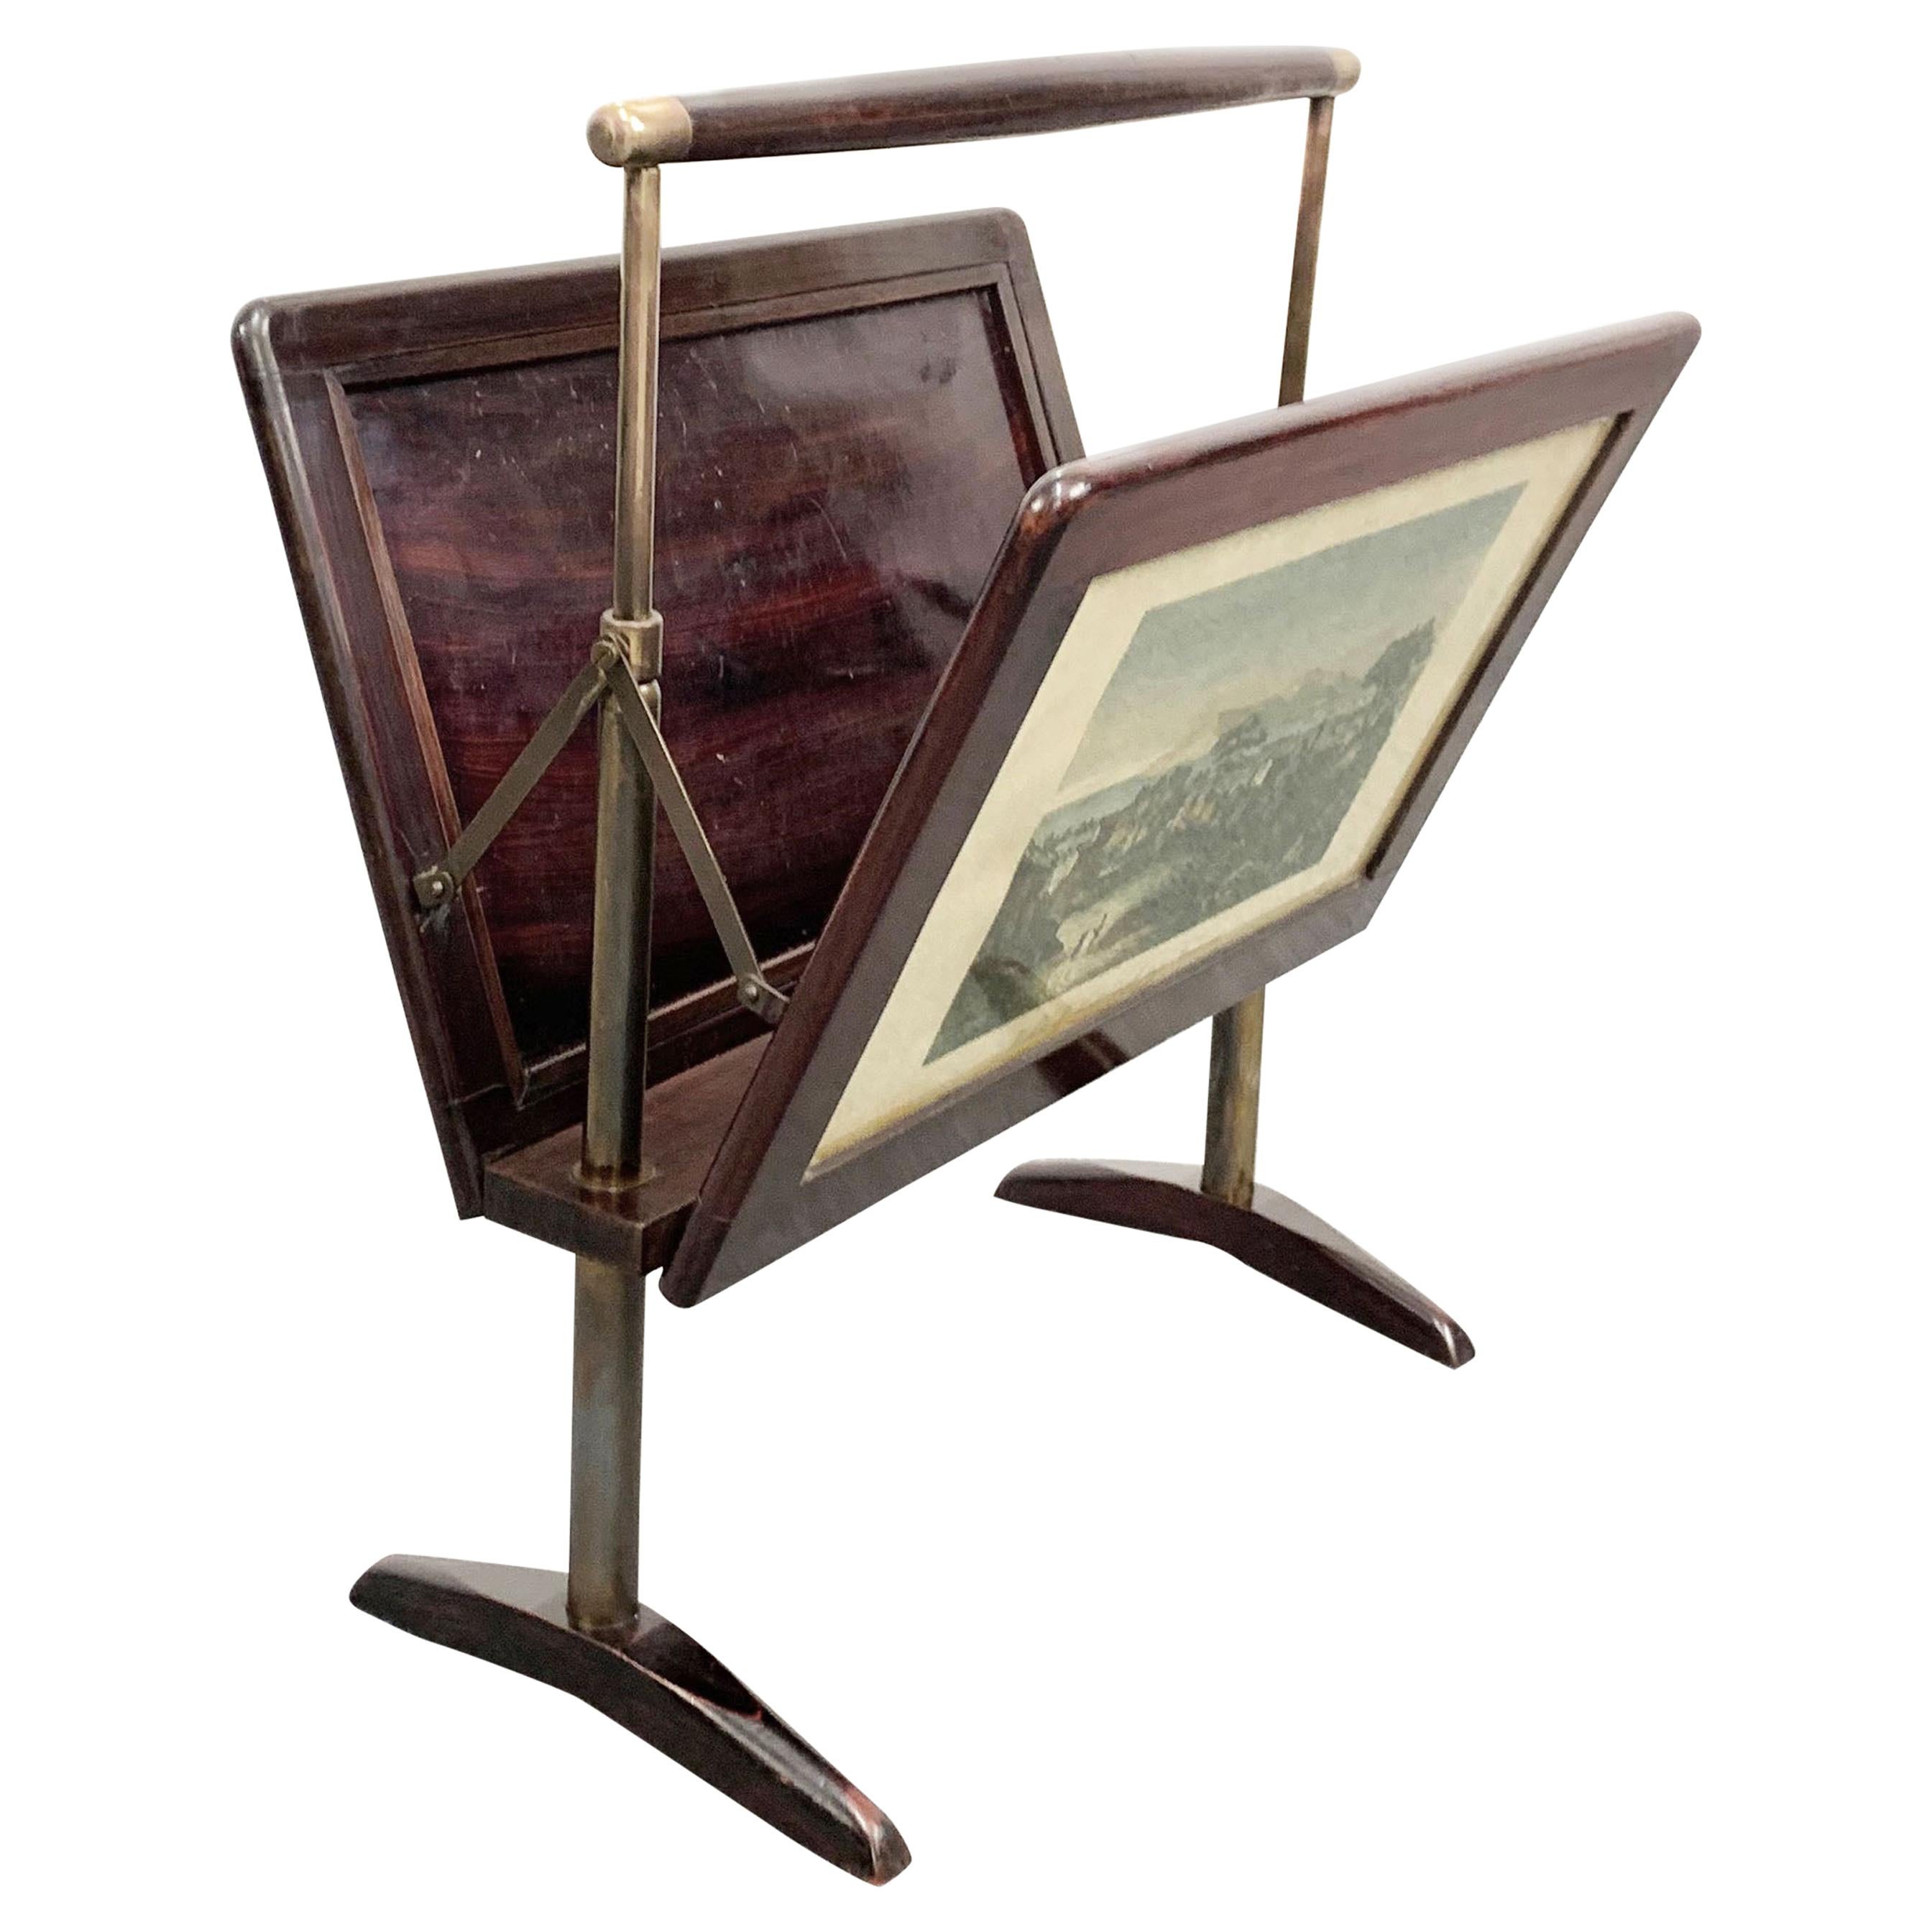 Midcentury Wood and Brass Italian Magazine Rack in Ico Parisi Style, 1950s For Sale